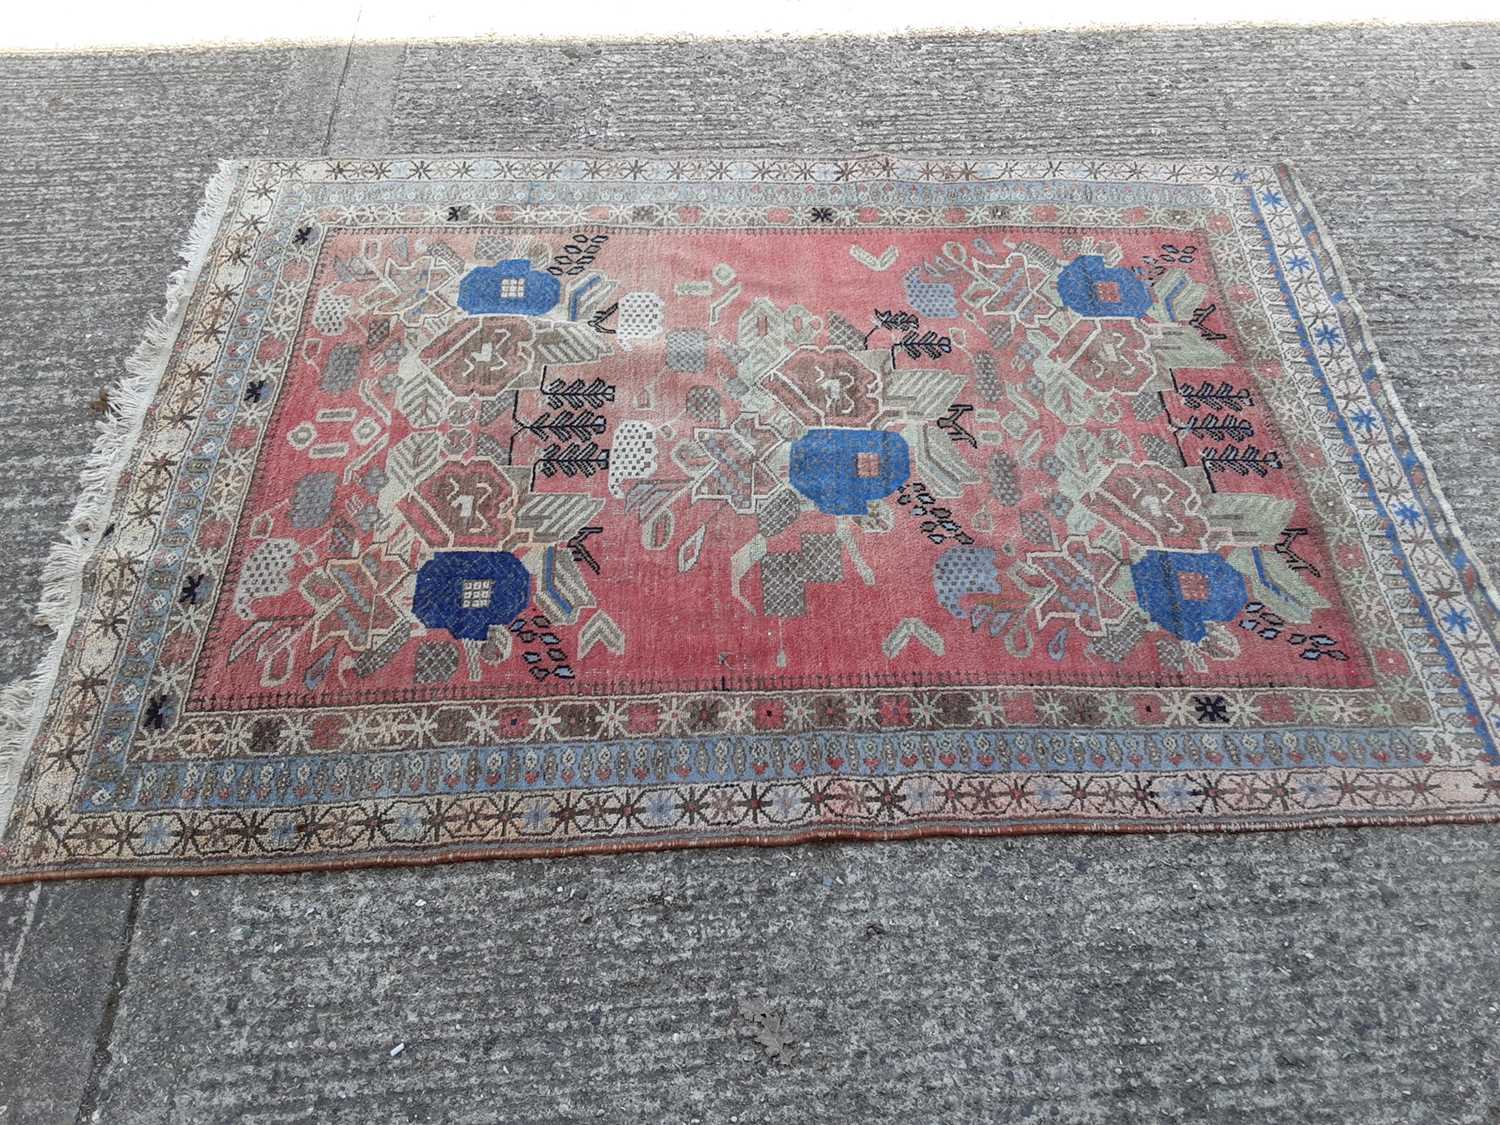 Lot 398 - Eastern rug with geometric decoration on red, blue and beige ground, 207cm x 146cm